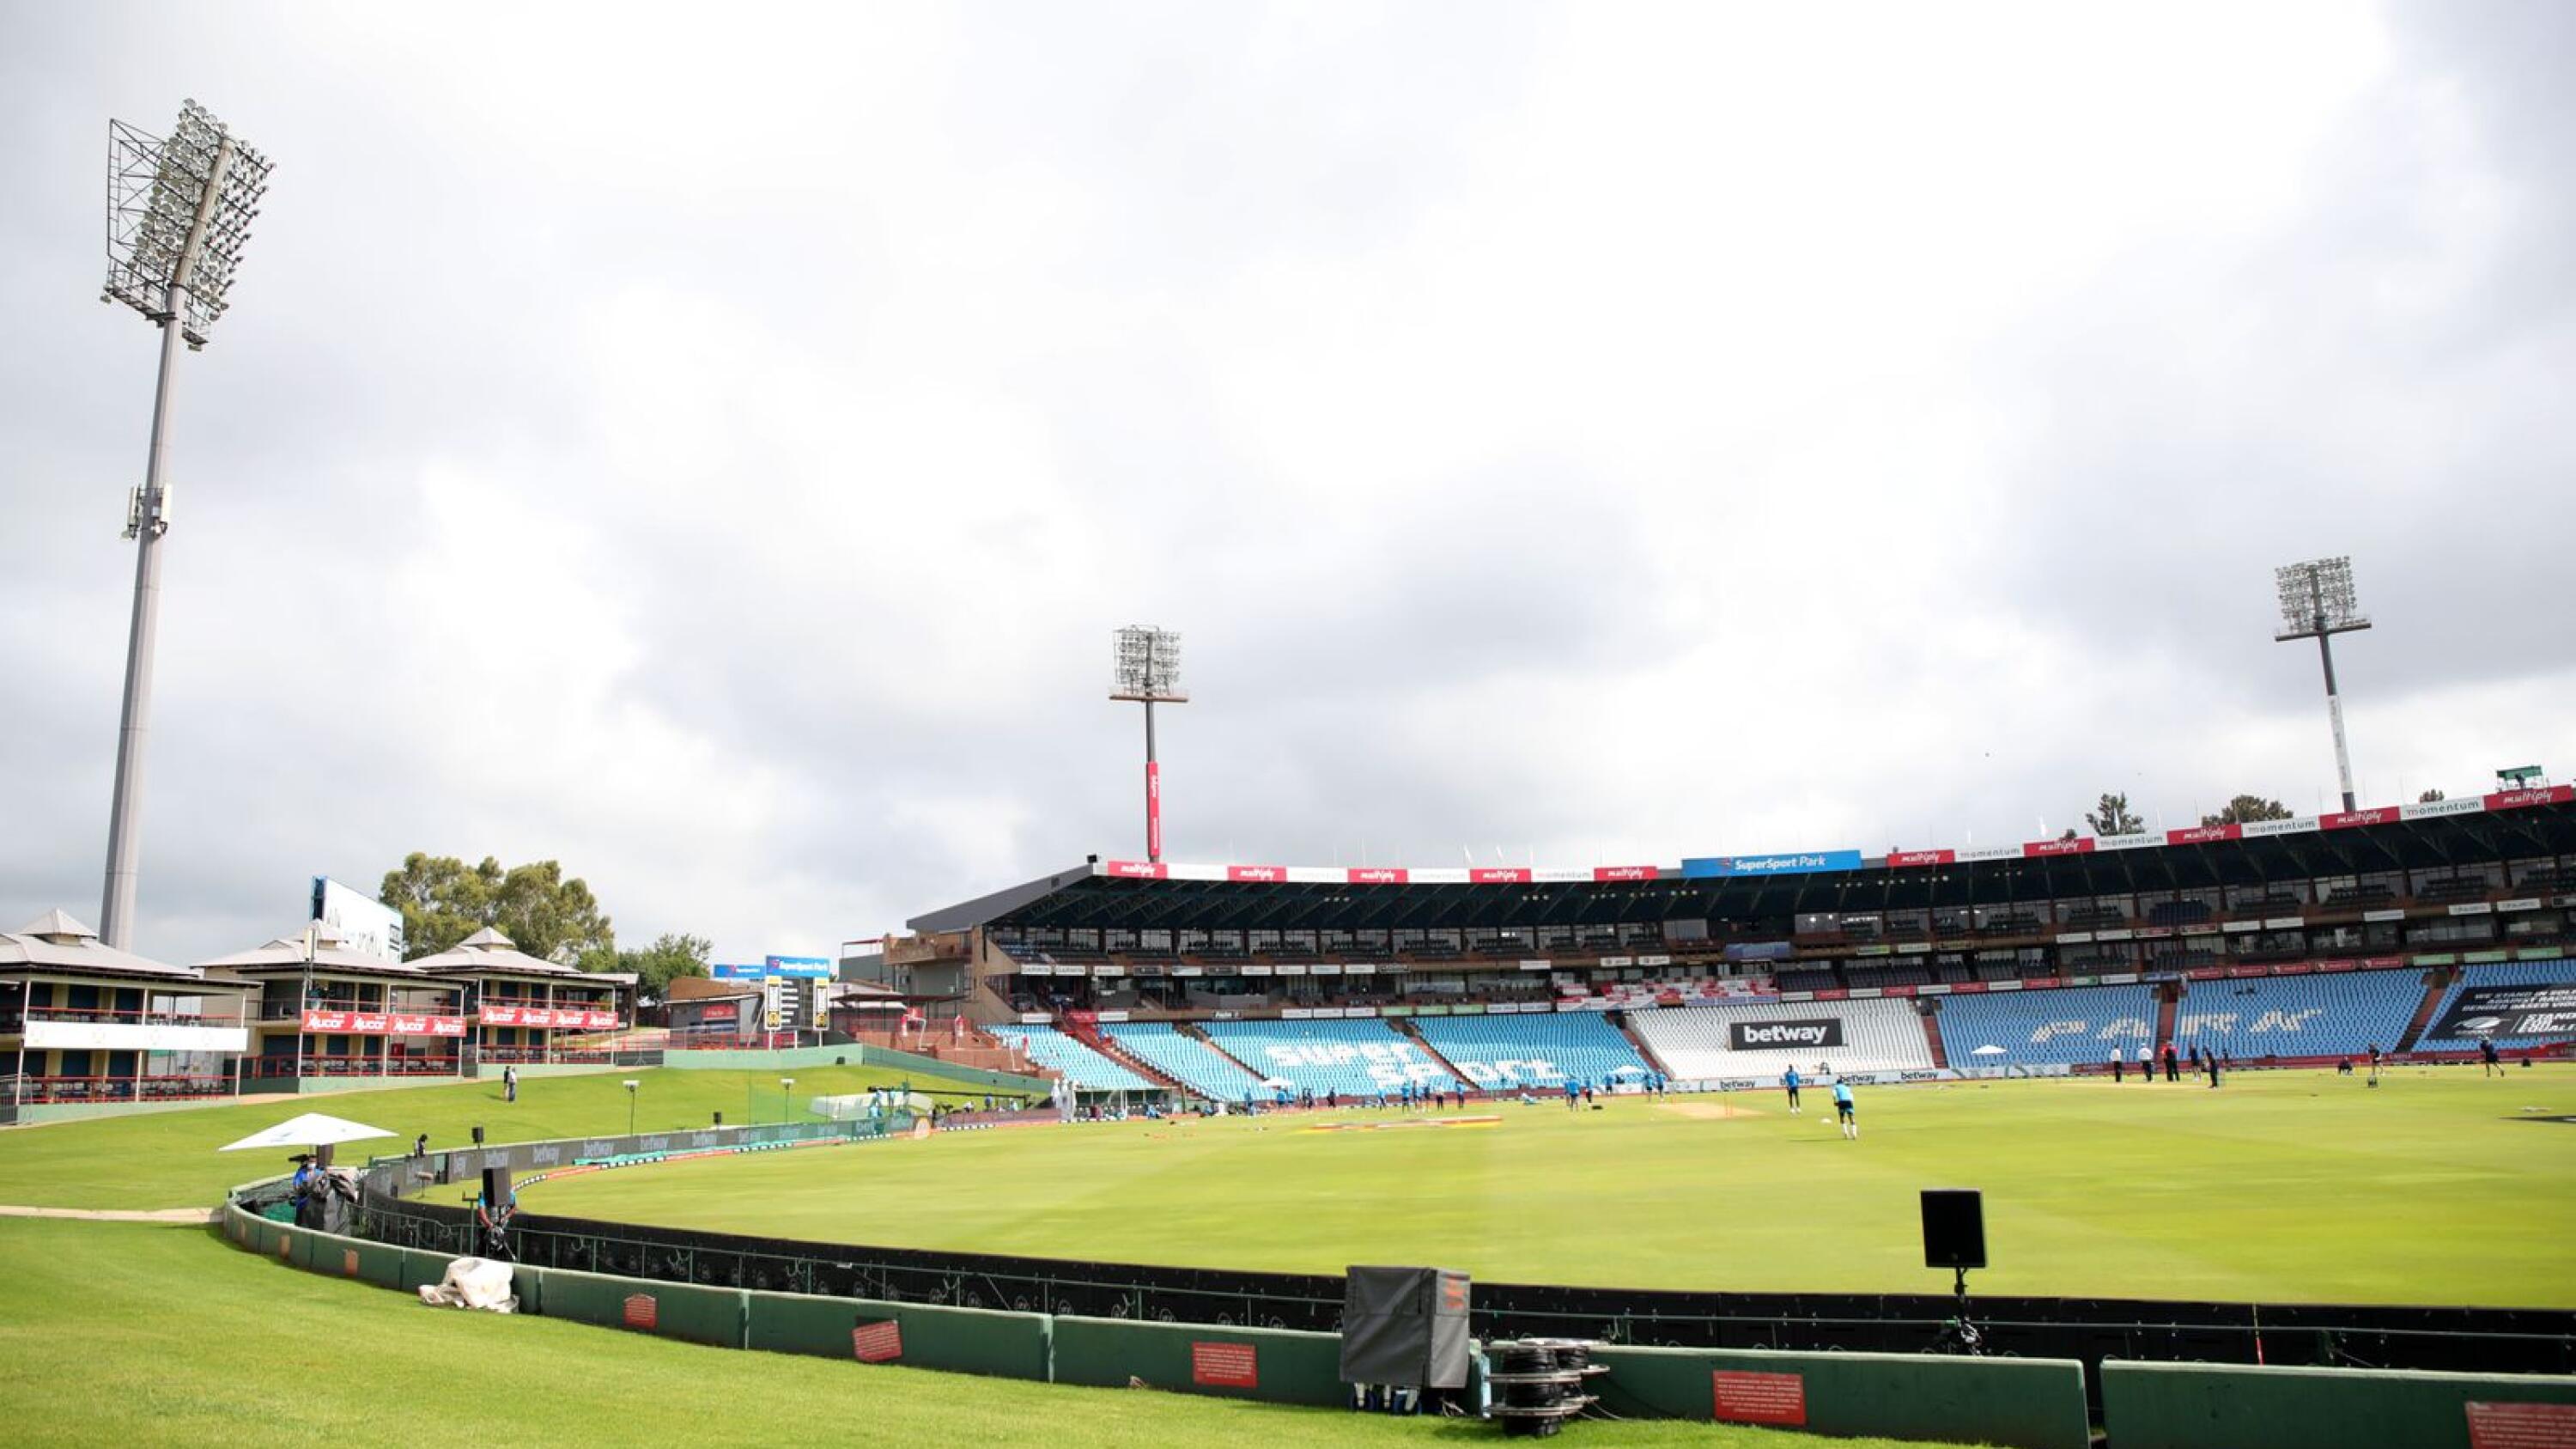 General view of SuperSport Park in Centurion during last year’s test match between the Proteas and Sri Lanka